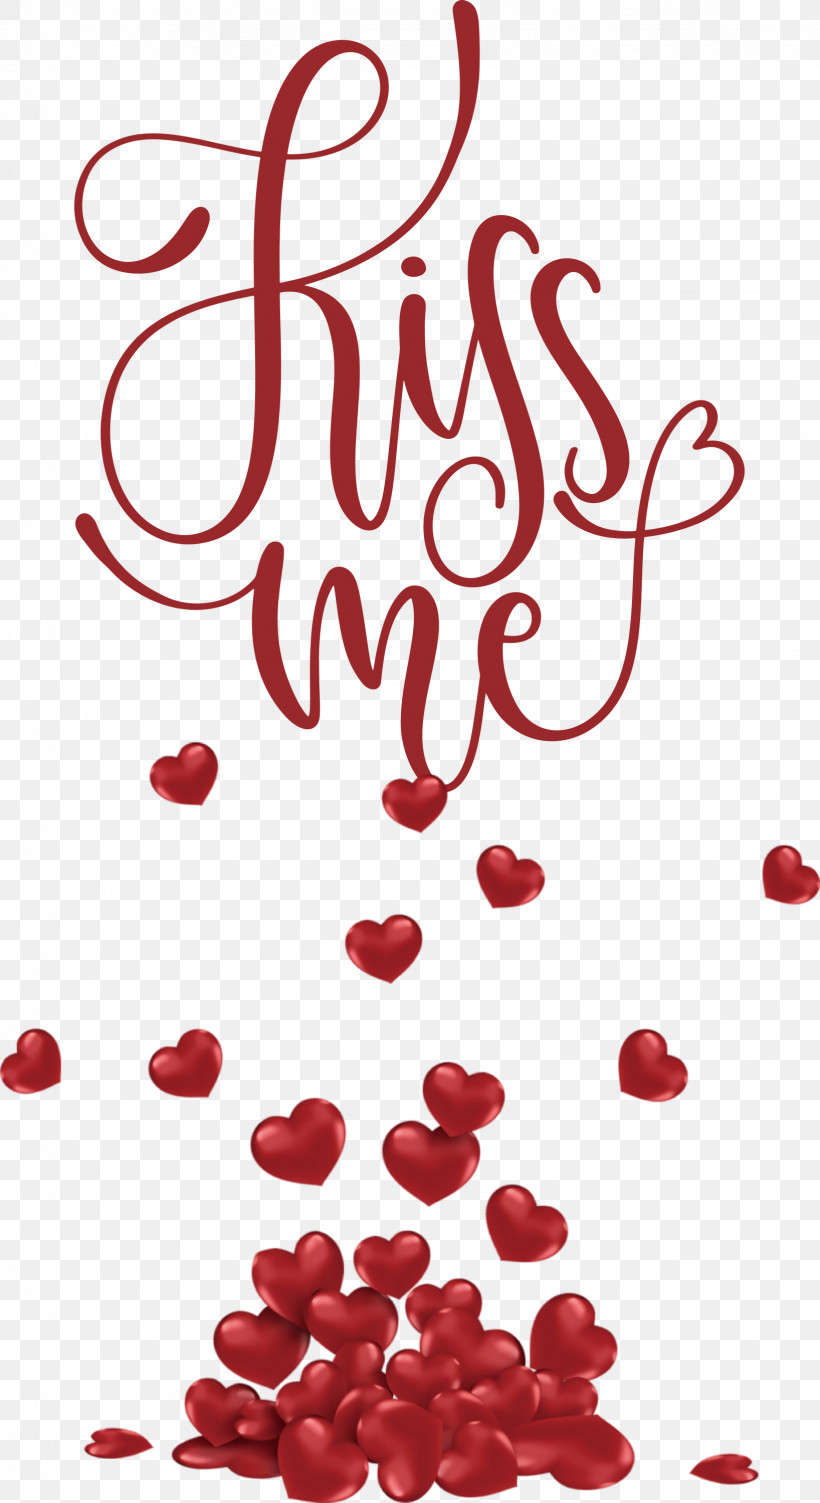 Kiss Me Valentines Day Valentine, PNG, 1636x3000px, Kiss Me, Day Heart Valentines Day, Heart, Heart Balloons, Love Hearts Download Free